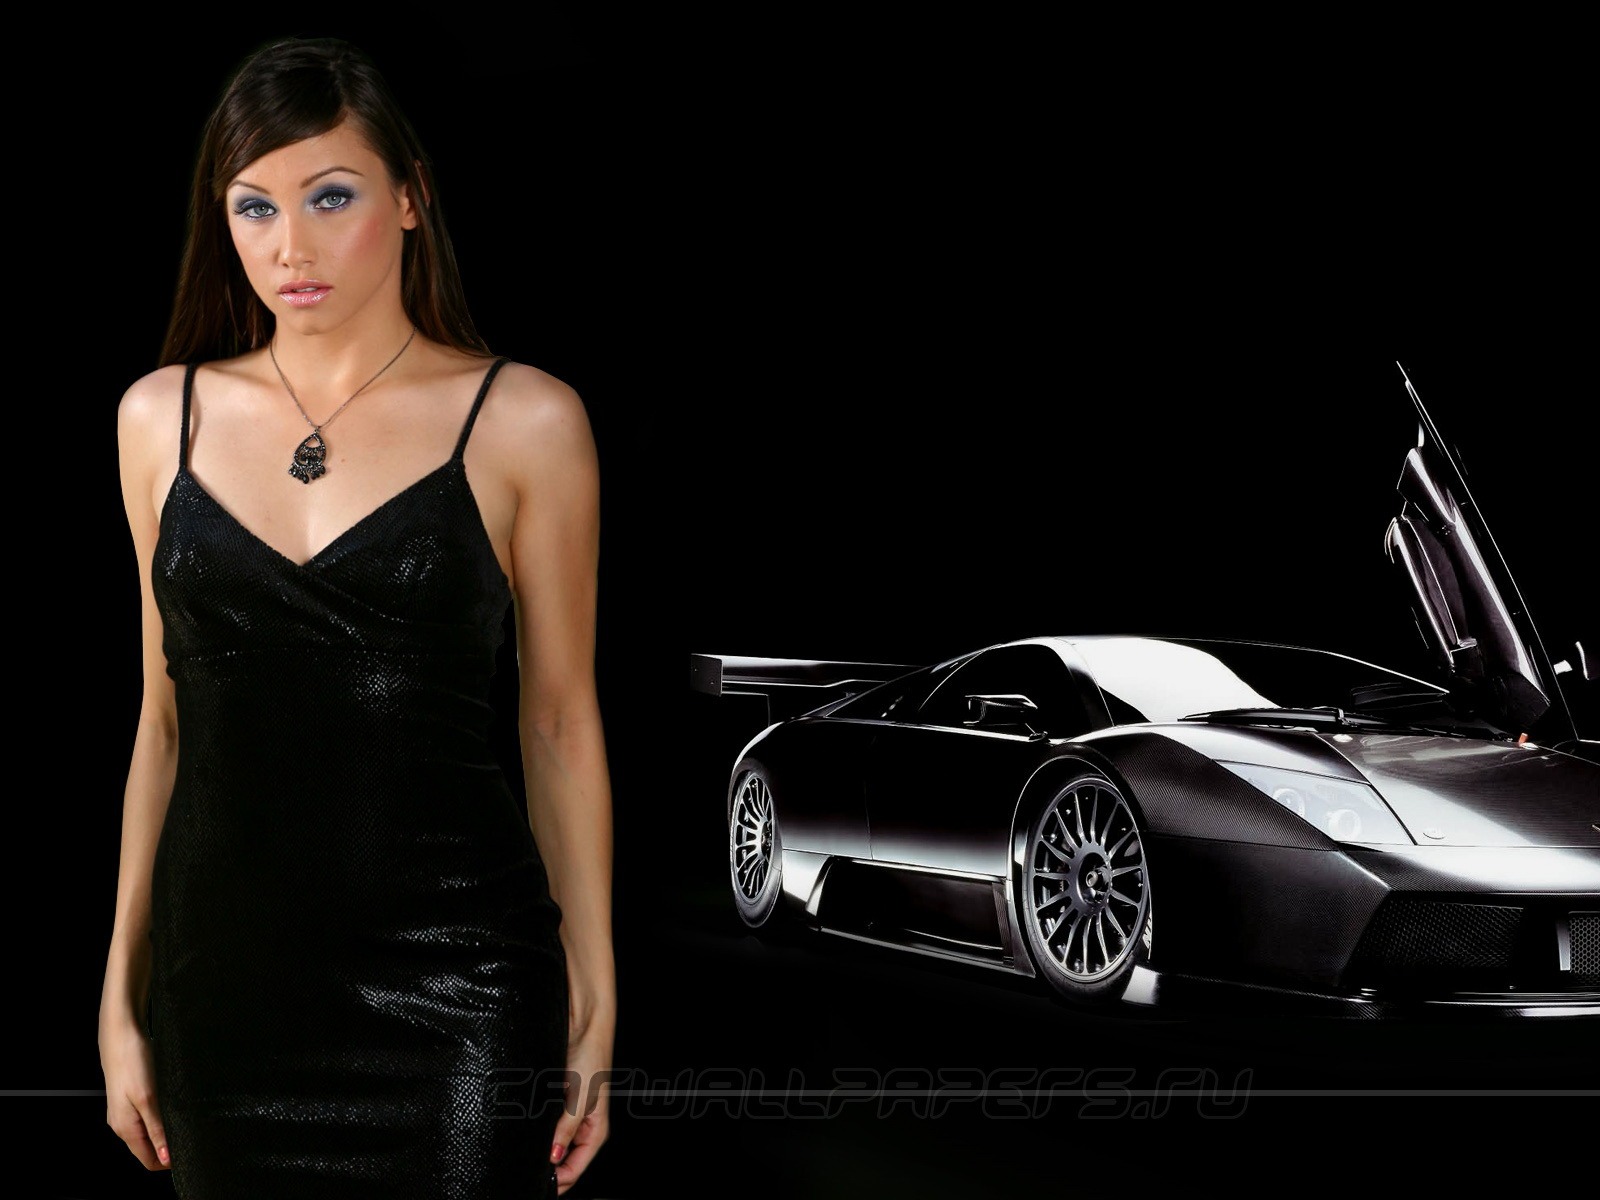 Cars and Girls wallpapers (2) #3 - 1600x1200